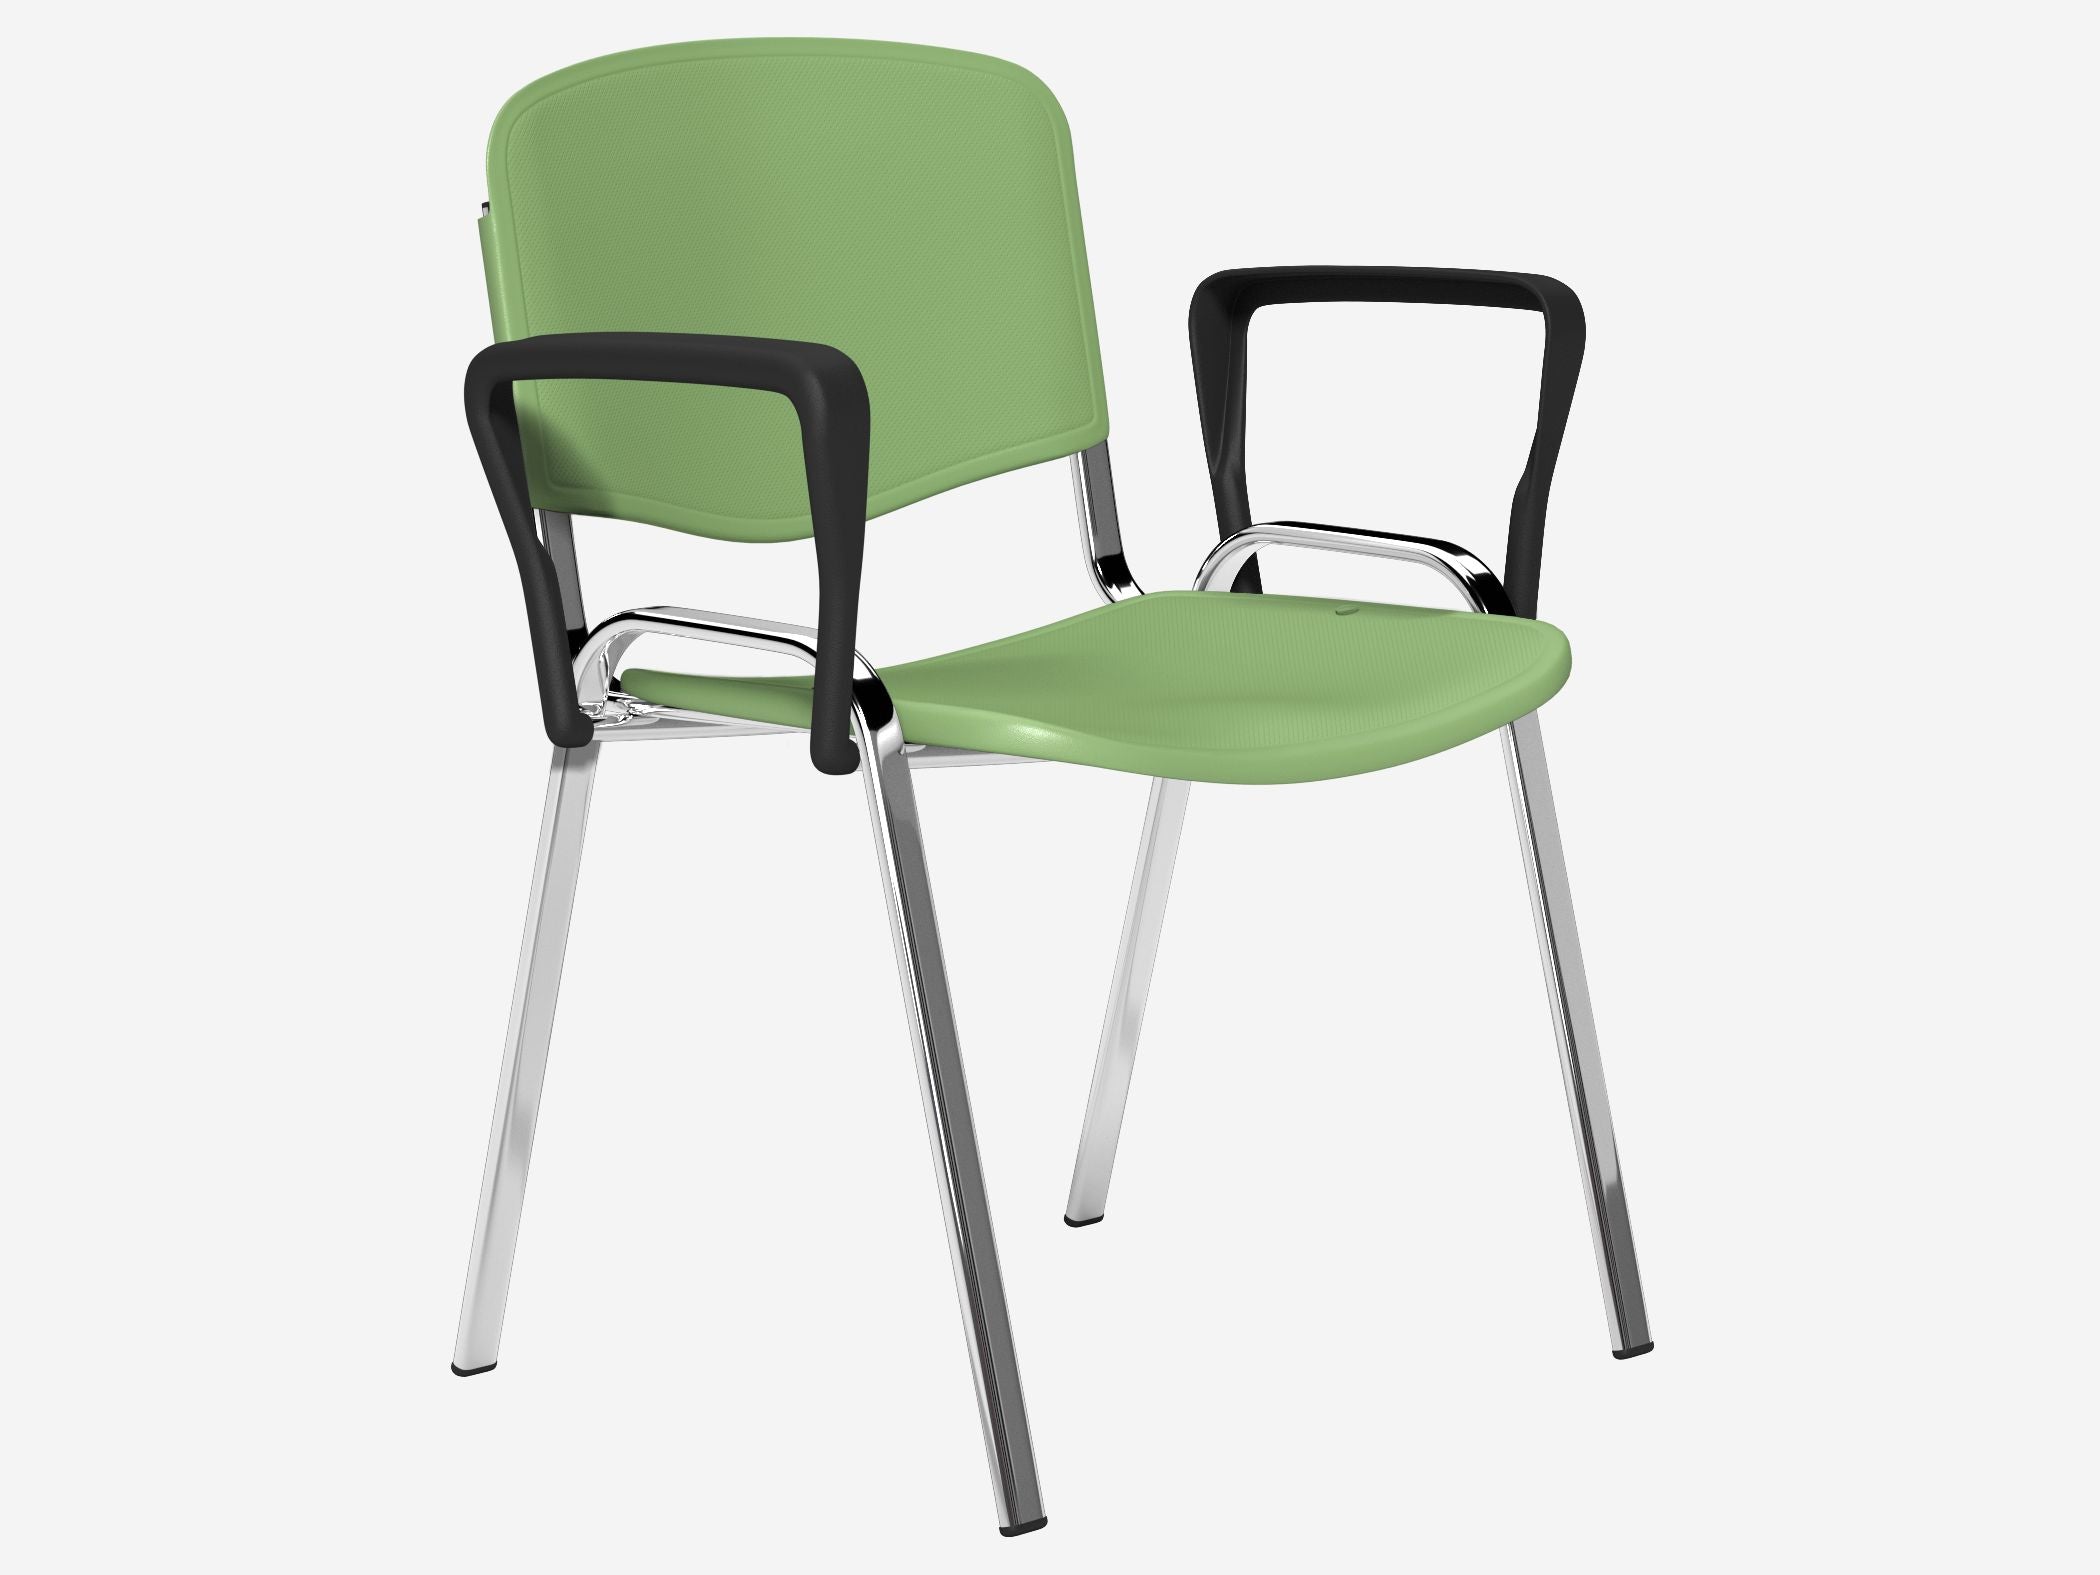 OI Series Plastic Seat and Backrest Chair, Chrome Frame